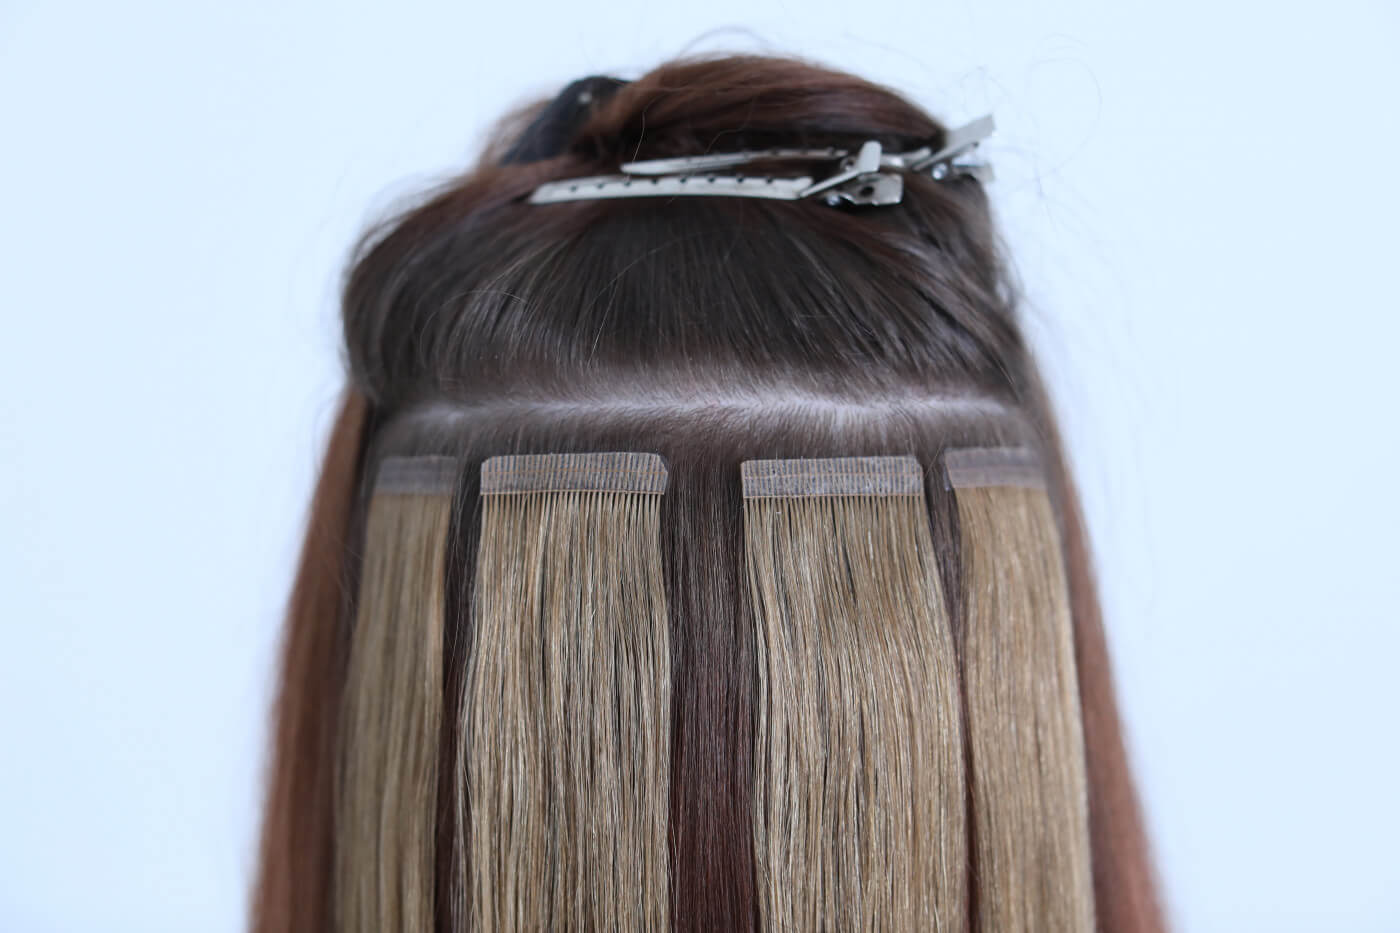 Do Tape-Ins Damage Your Hair?